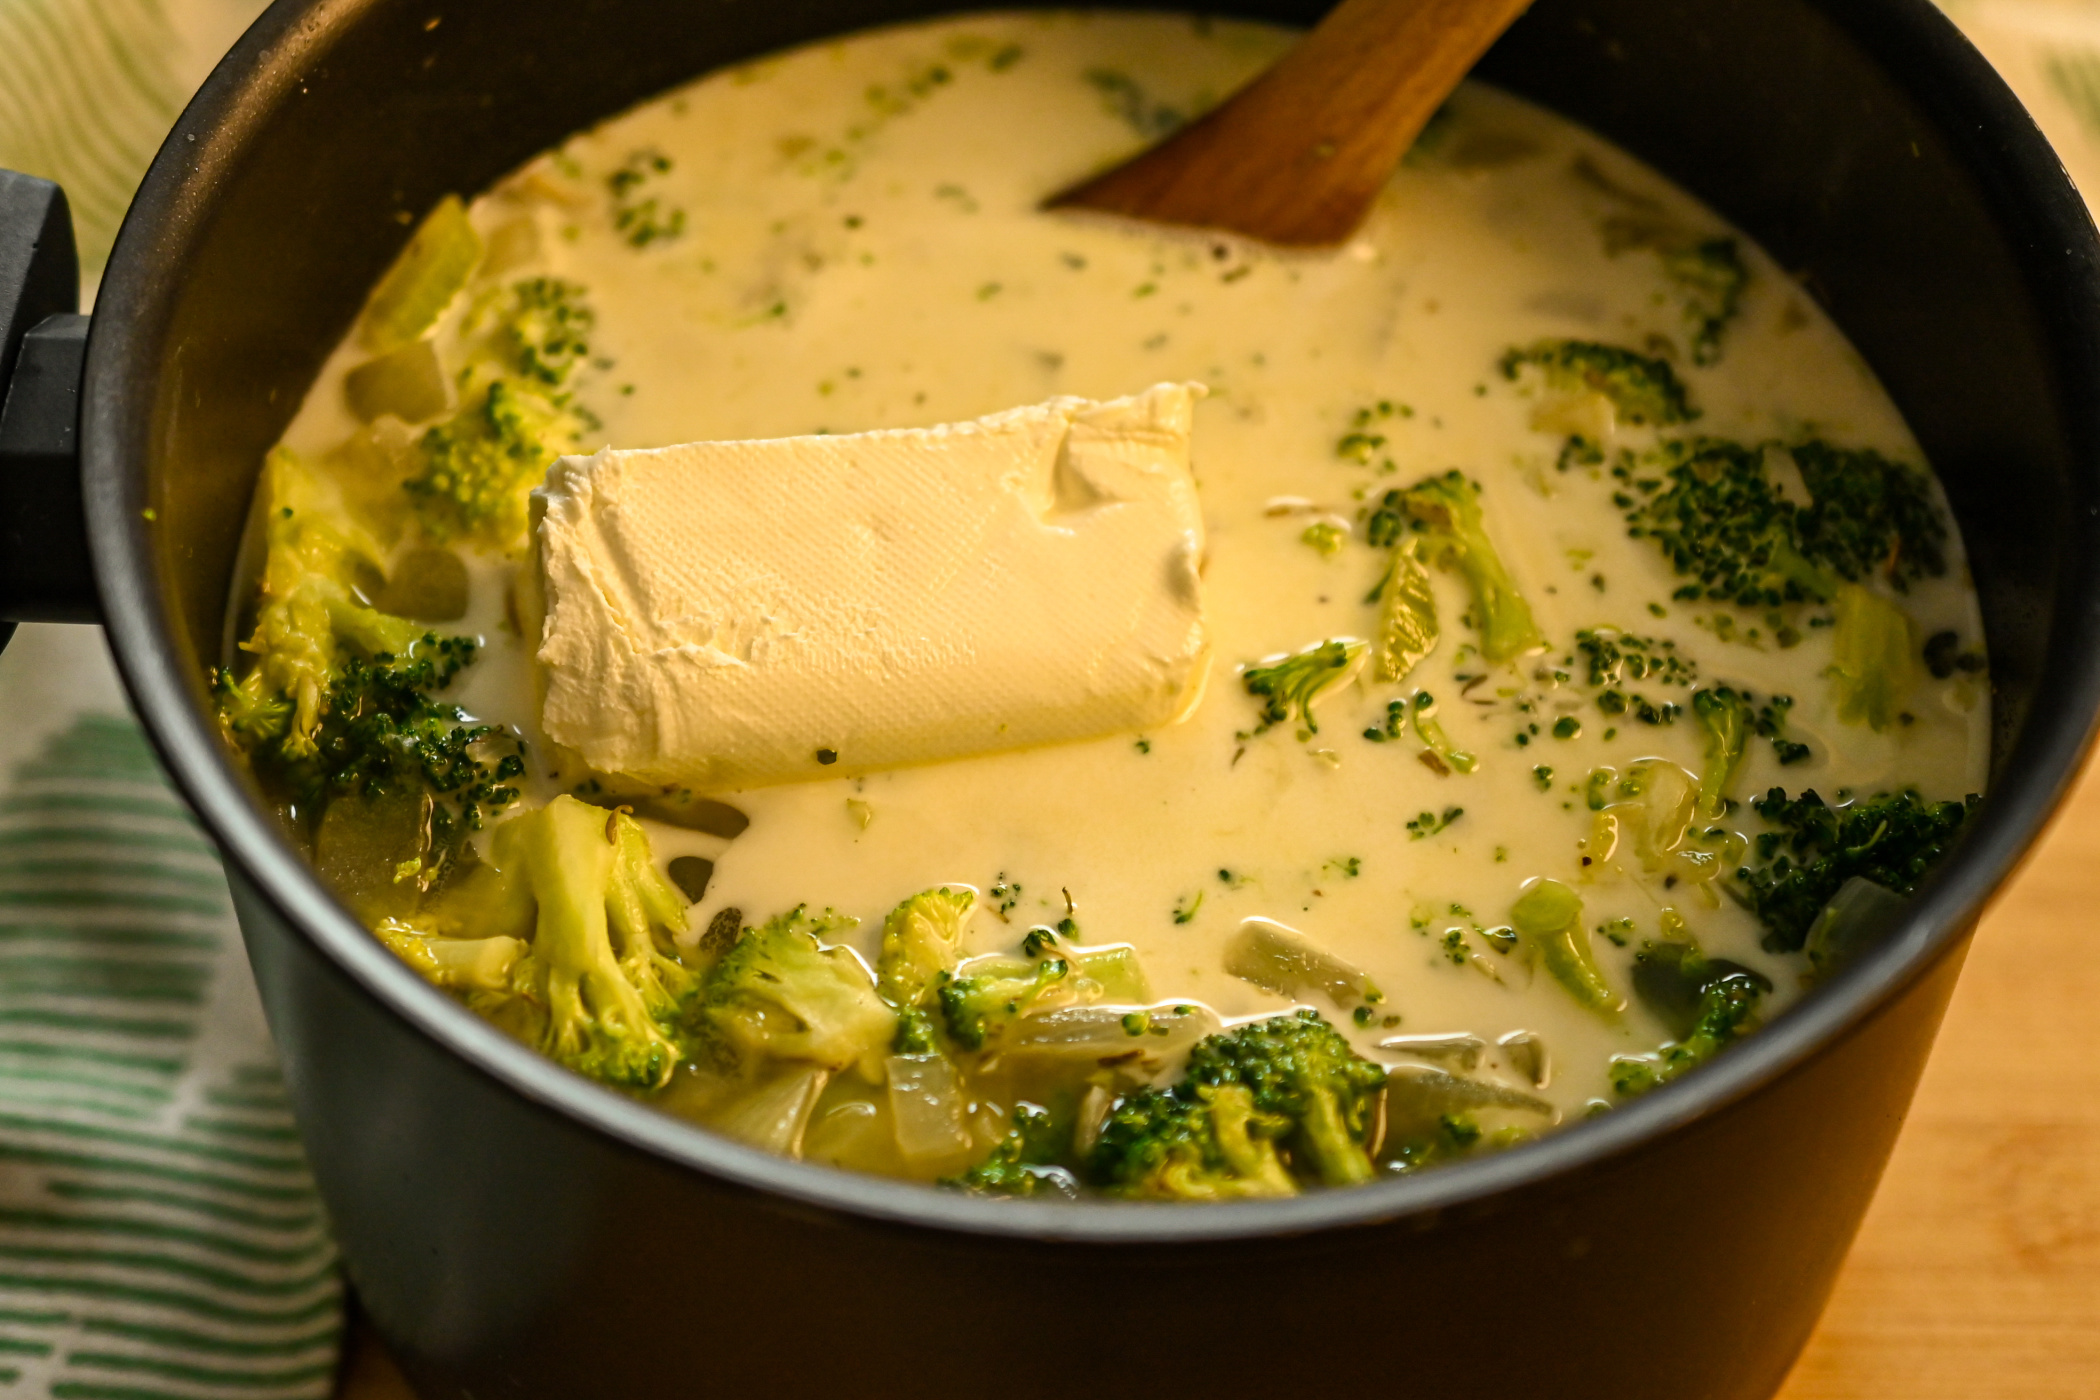 keto cream of broccoli soup being made in a 5 quart pot